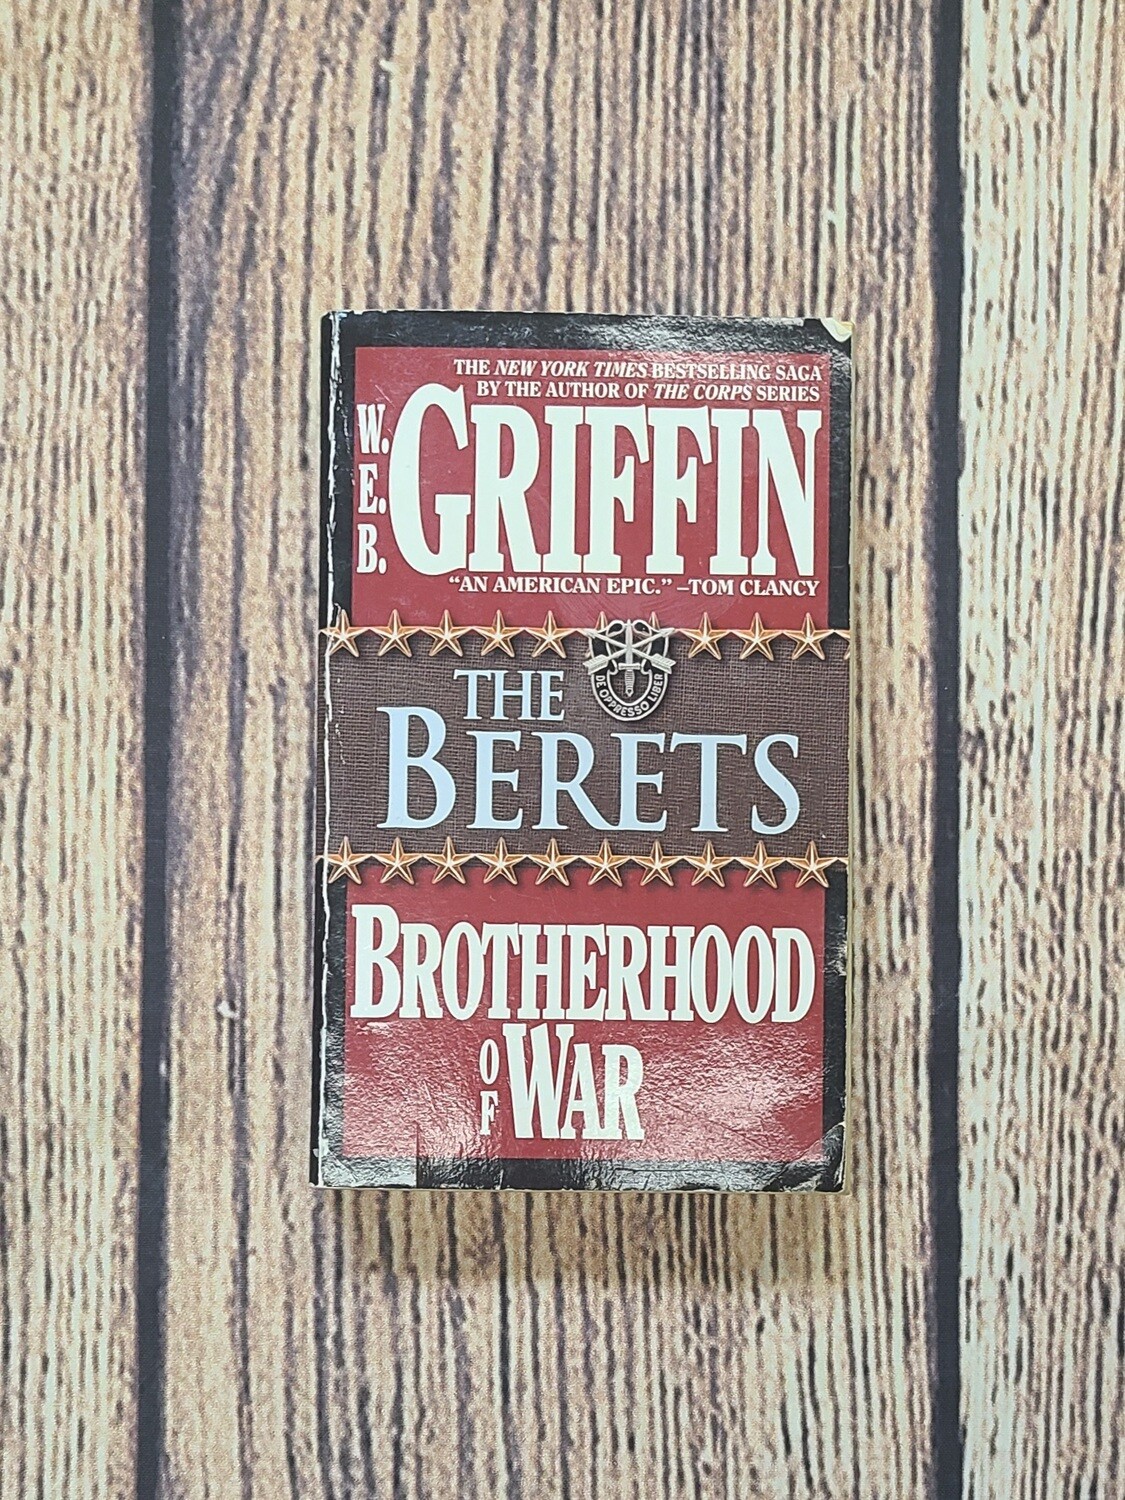 Brotherhood of War: The Berets by W.E.B. Griffin